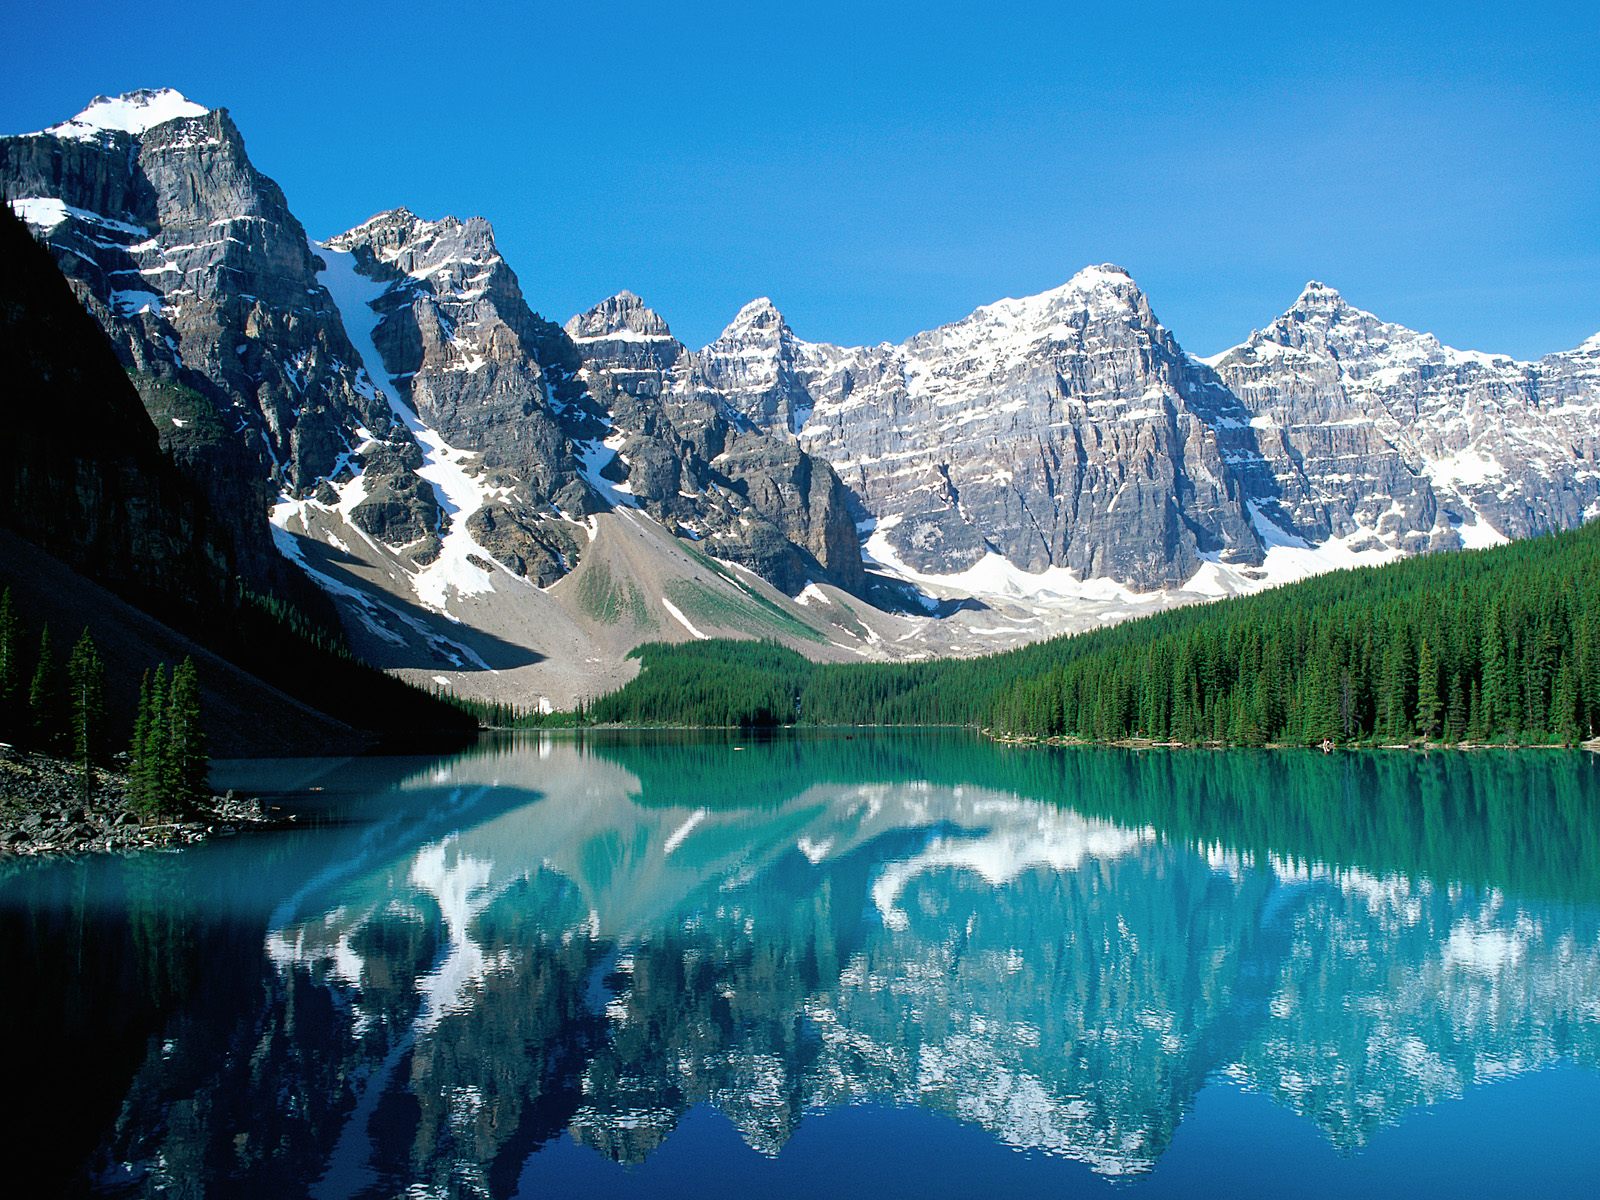 One of the most beautiful and welcoming countries in the world, Canada is an attractive destination for travelers of all types. Its stunning landscapes and ...